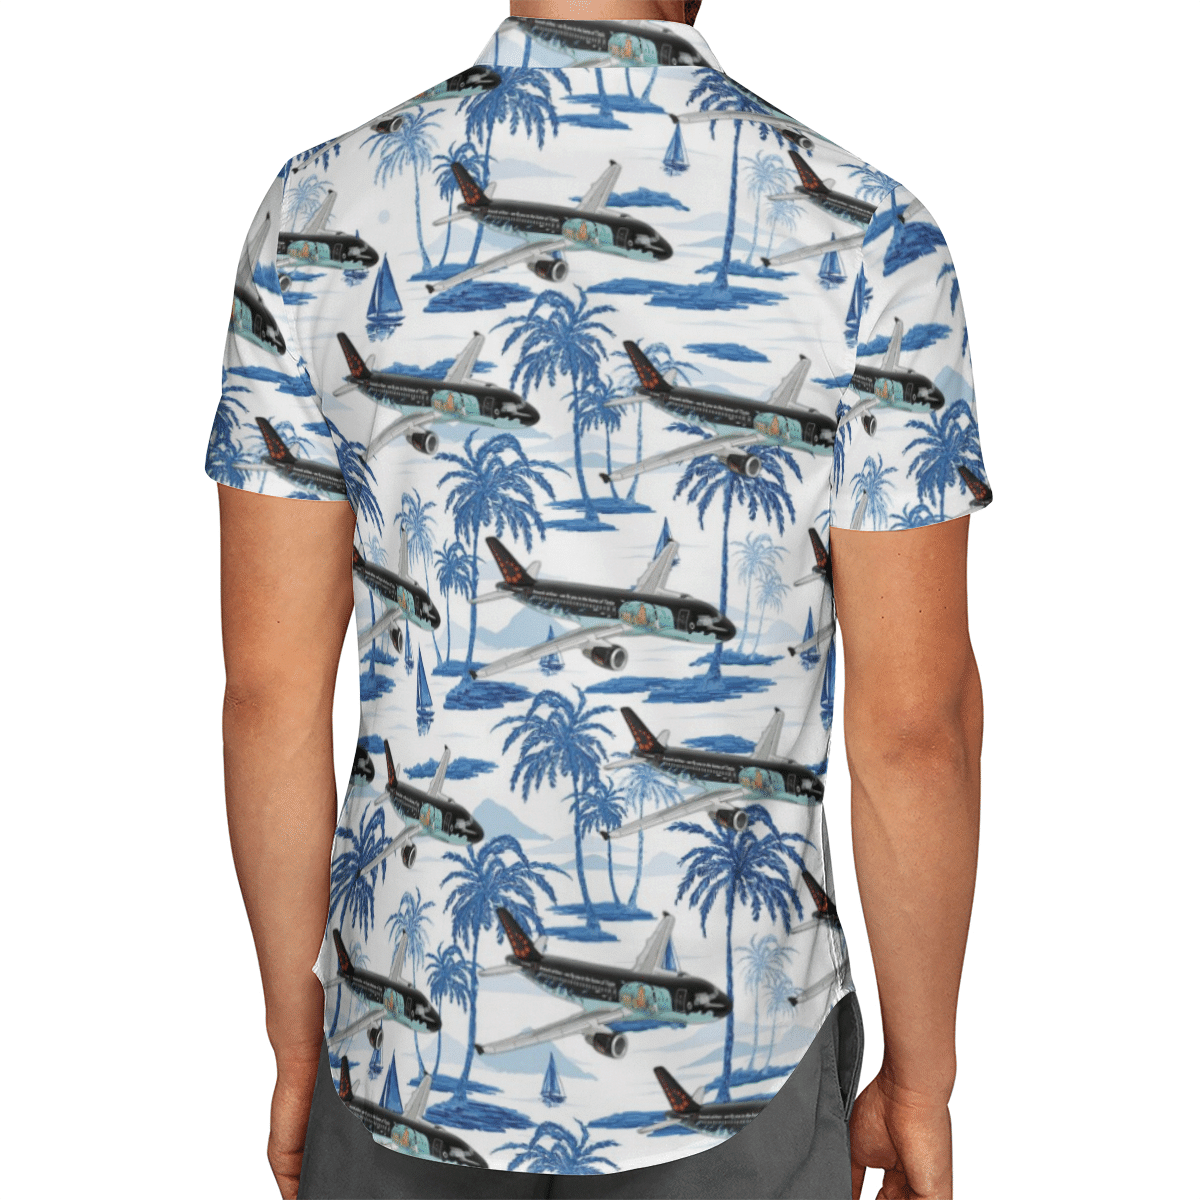 Going to the beach with a quality shirt 47